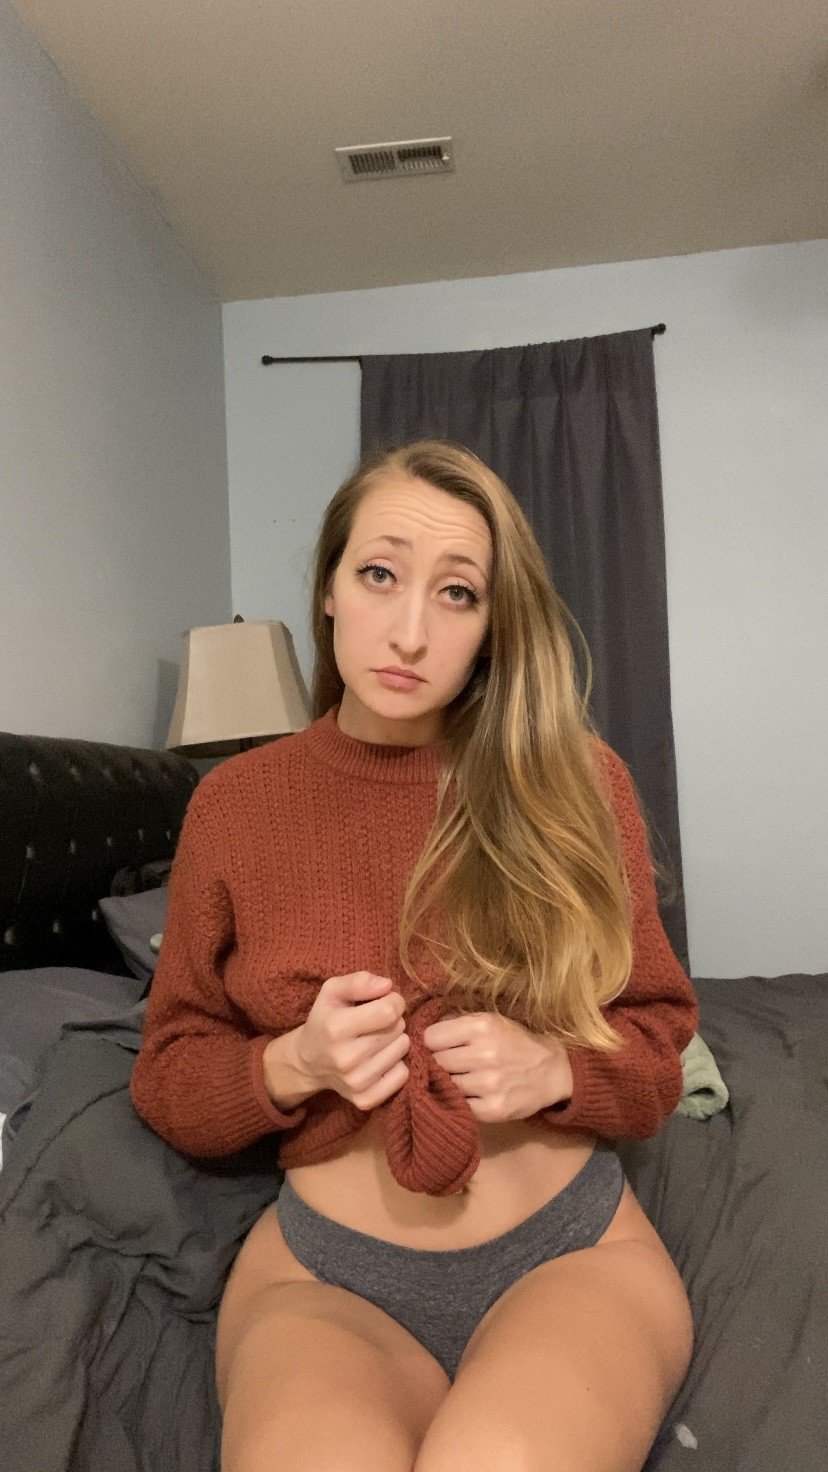 Photo by Trishbunny with the username @Trishbunny, who is a star user,  December 11, 2020 at 4:36 PM. The post is about the topic Amateurs and the text says 'Happy Friday!🍑❤️ 

If you want to see me finger my soaking wet pussy today, grab your free trial to OnlyFans before the new year!🎉🎁🔞

OnlyFans:Trishbunny 🐰link below🐰

#OnlyFans #free #freetrial #amateur #freebiefriday #pics #pictures #ass..'